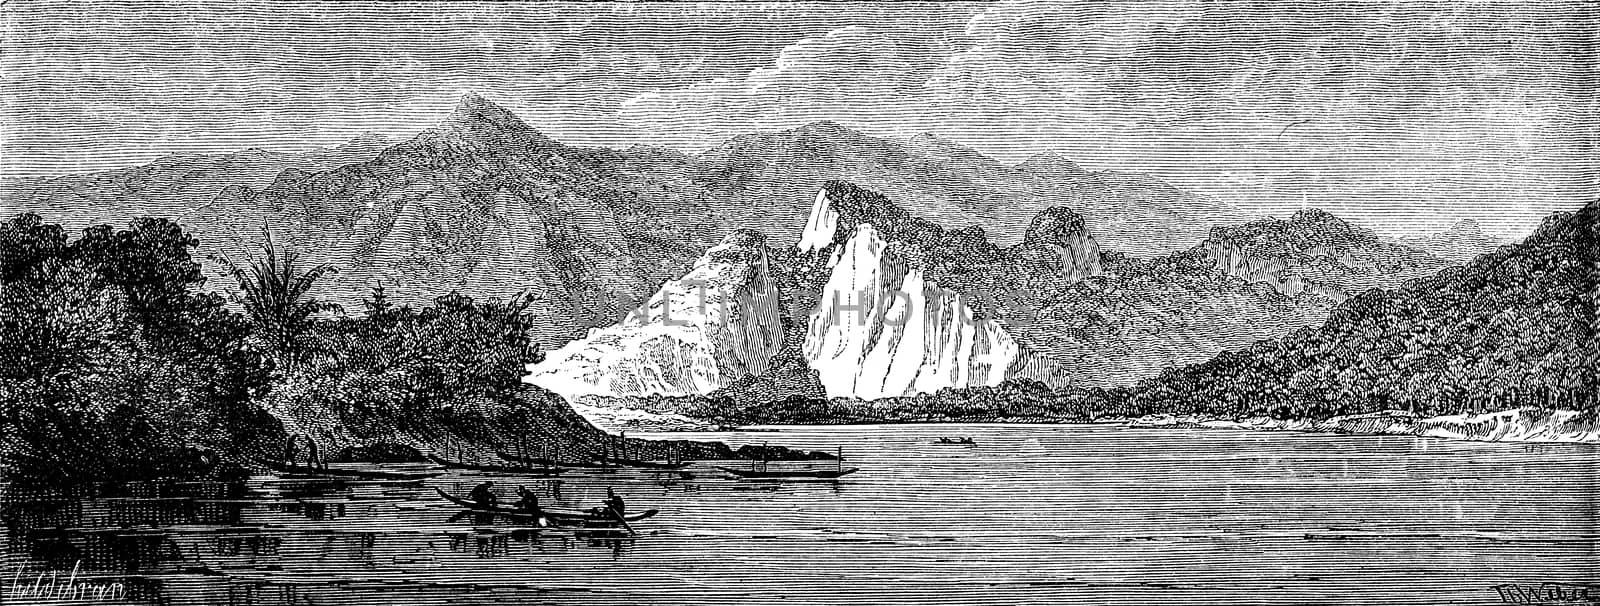 View of the river before reaching the Nam Hou, vintage engraved illustration. Le Tour du Monde, Travel Journal, (1872).
